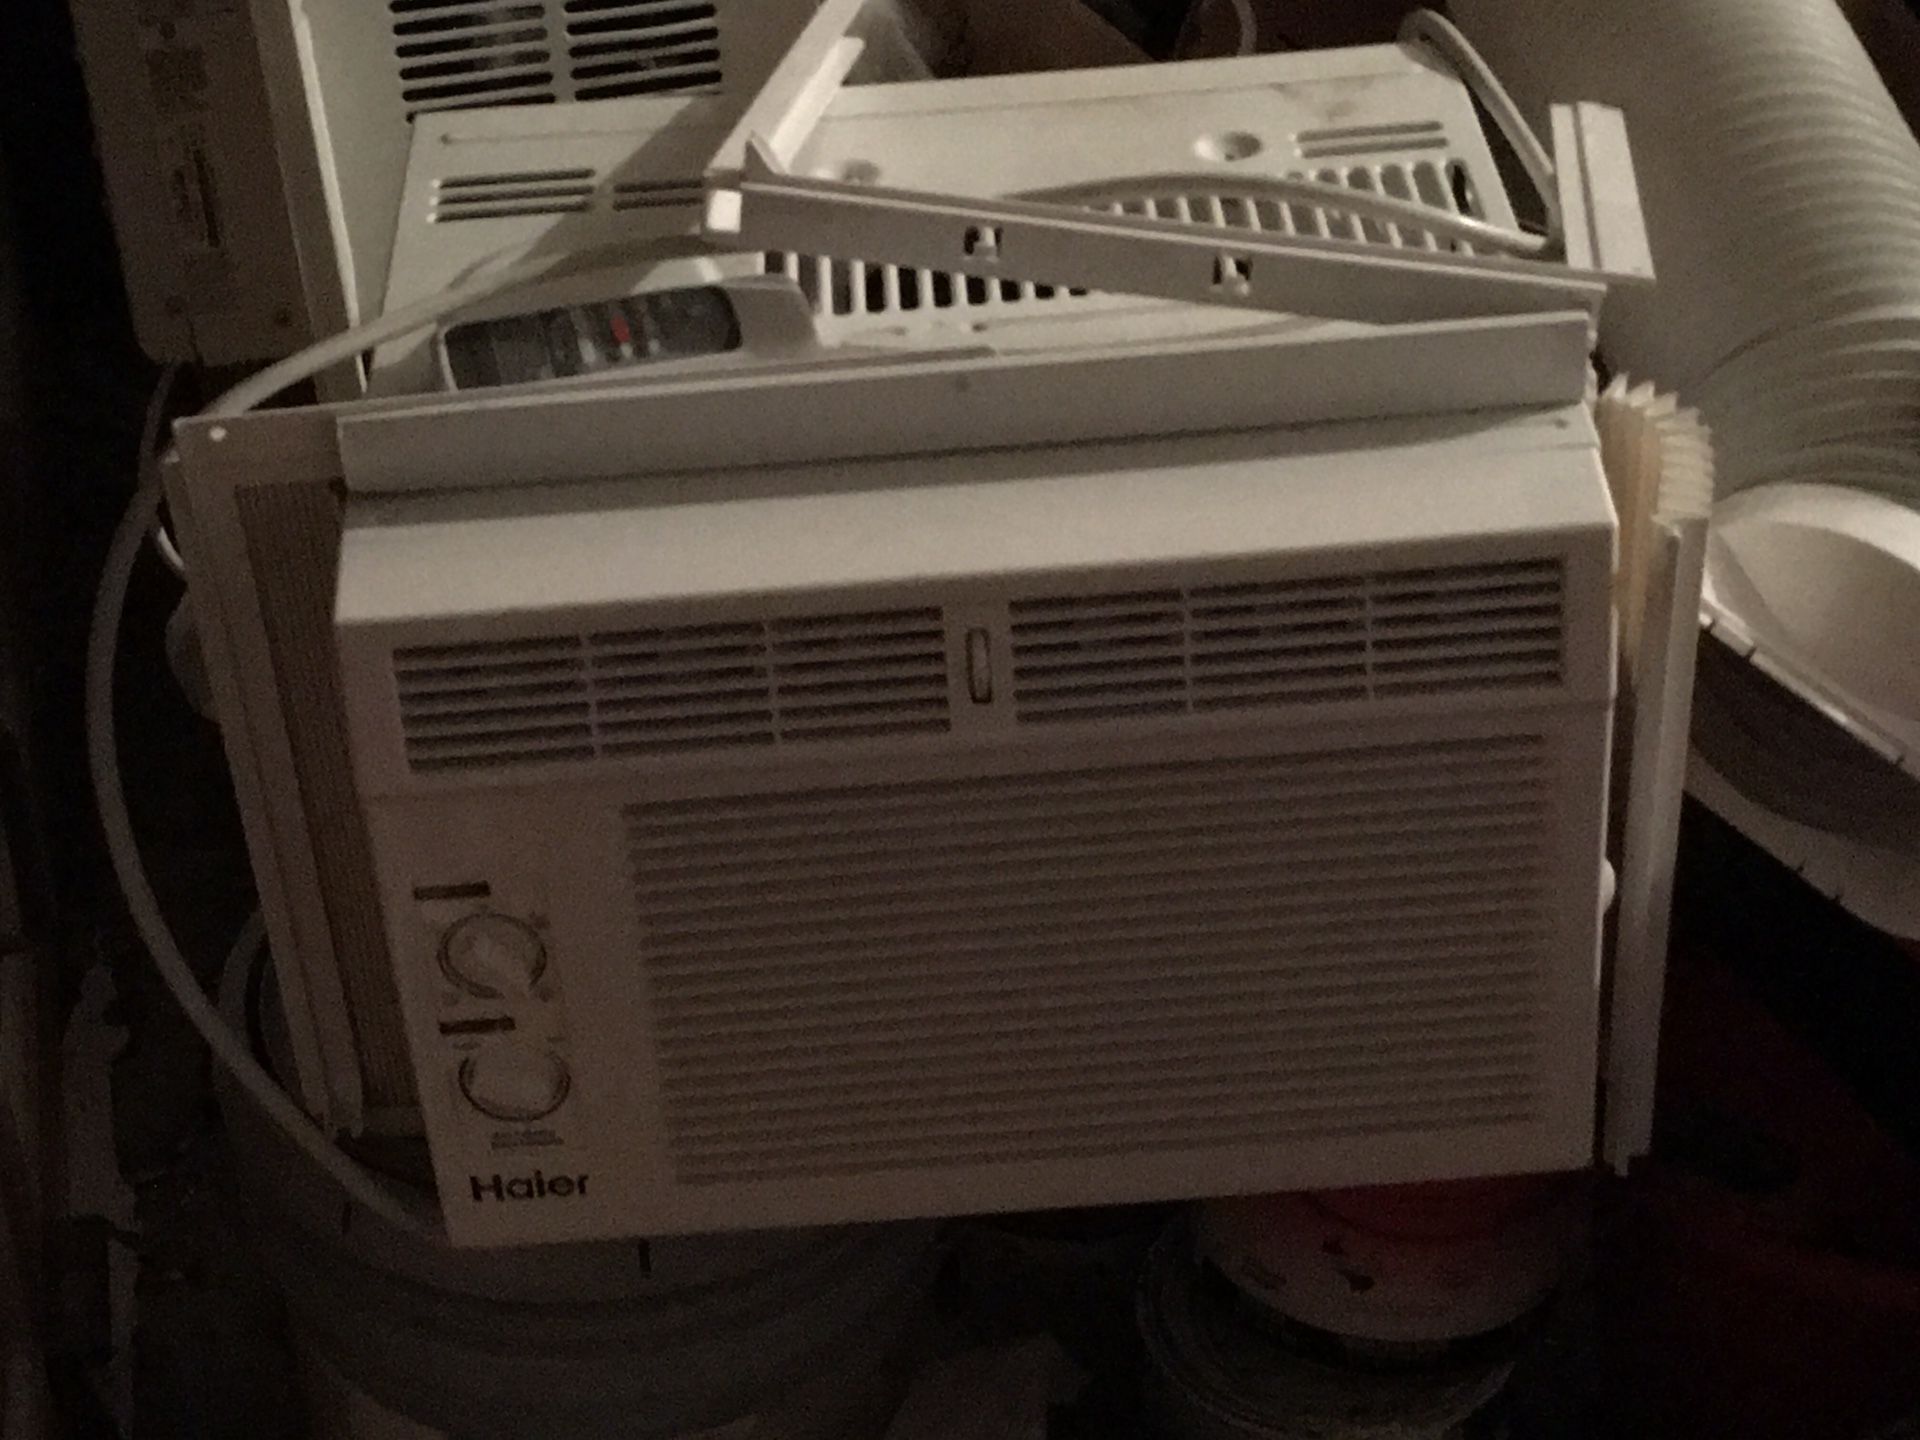 Window AC units $90-$120 barely used. 5k BTU. Brand new used for a month. If you see this ad, it’s available.